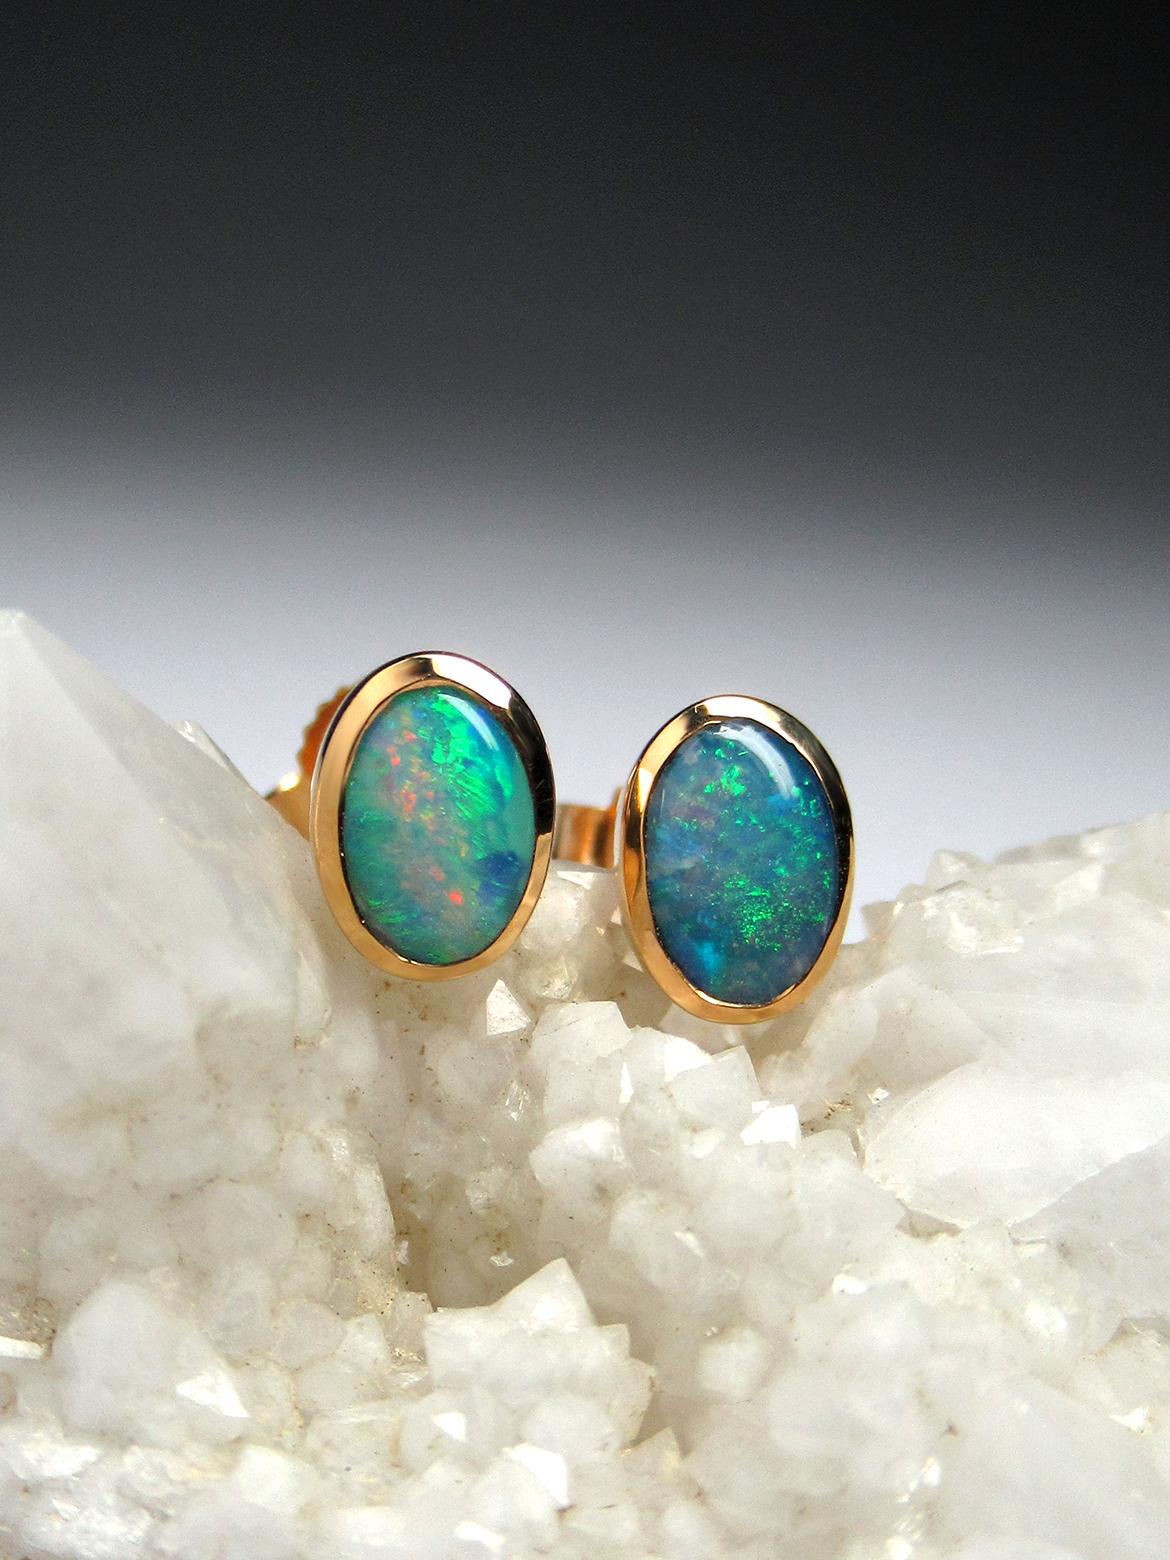 18K yellow gold stud earrings with bright Black Opal 
gemstone origin - Australia
gem size is 5 x 7 mm
opals weight - 0.55 carat
earrings weight - 1.1 grams
ref No 2459

Worldwide shipping from Berlin, Germany. Prices include all taxes, valid in